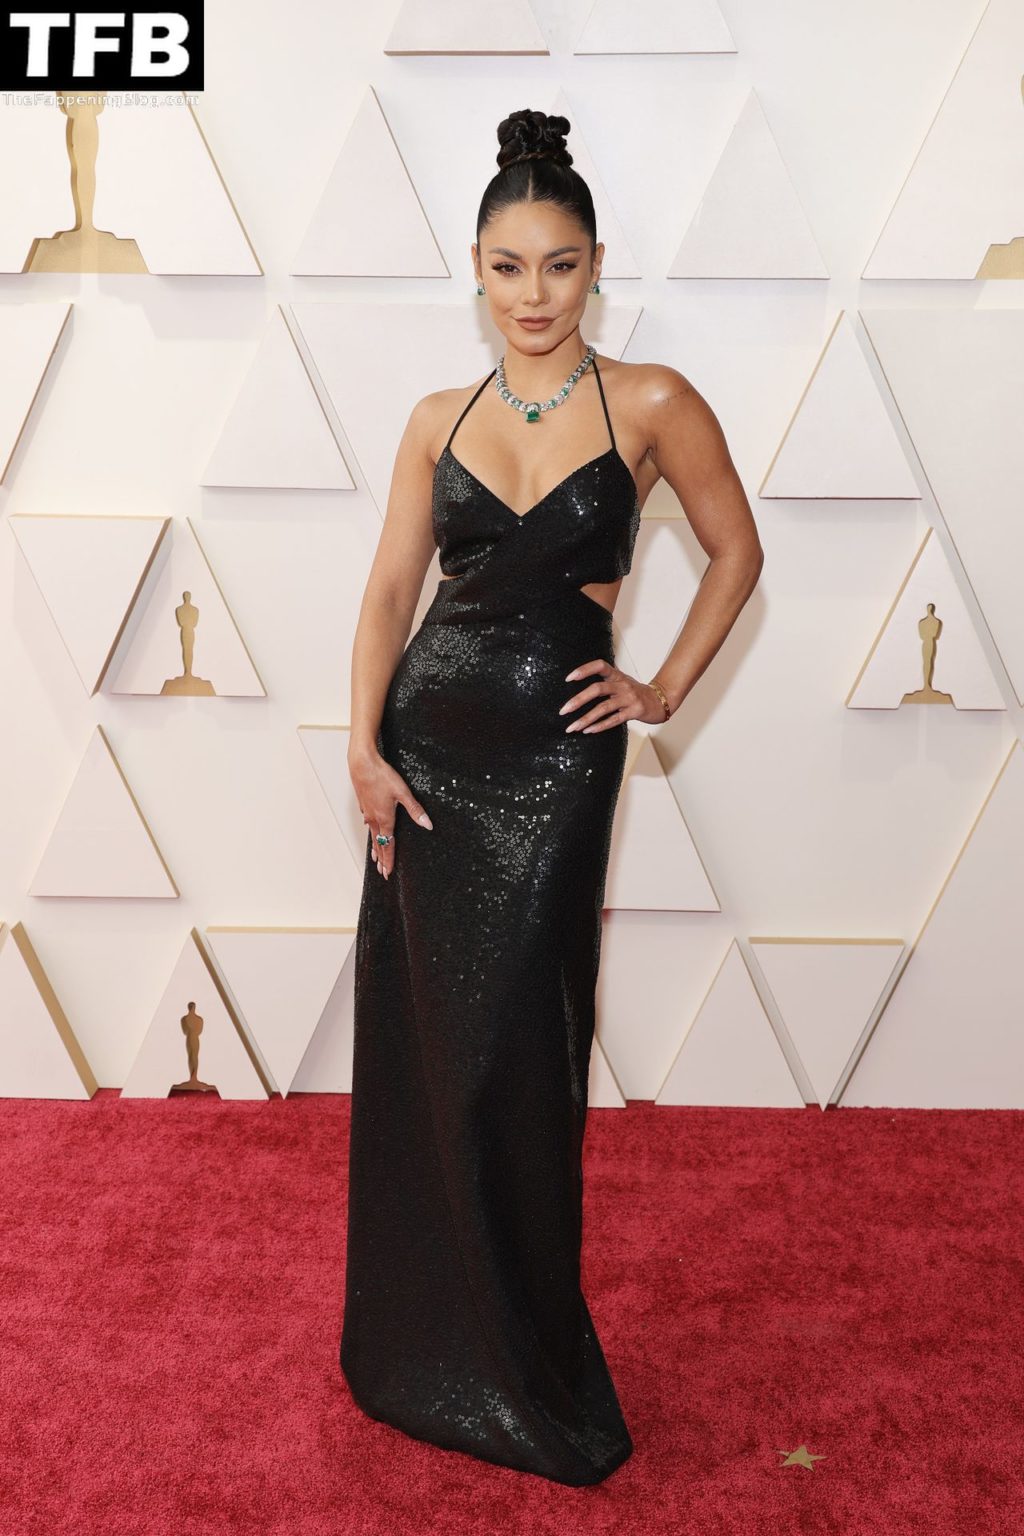 Vanessa Hudgens Sexy The Fappening Blog 25 4 1024x1536 - Vanessa Hudgens Poses on the Red Carpet at the 94th Annual Academy Awards (83 Photos)